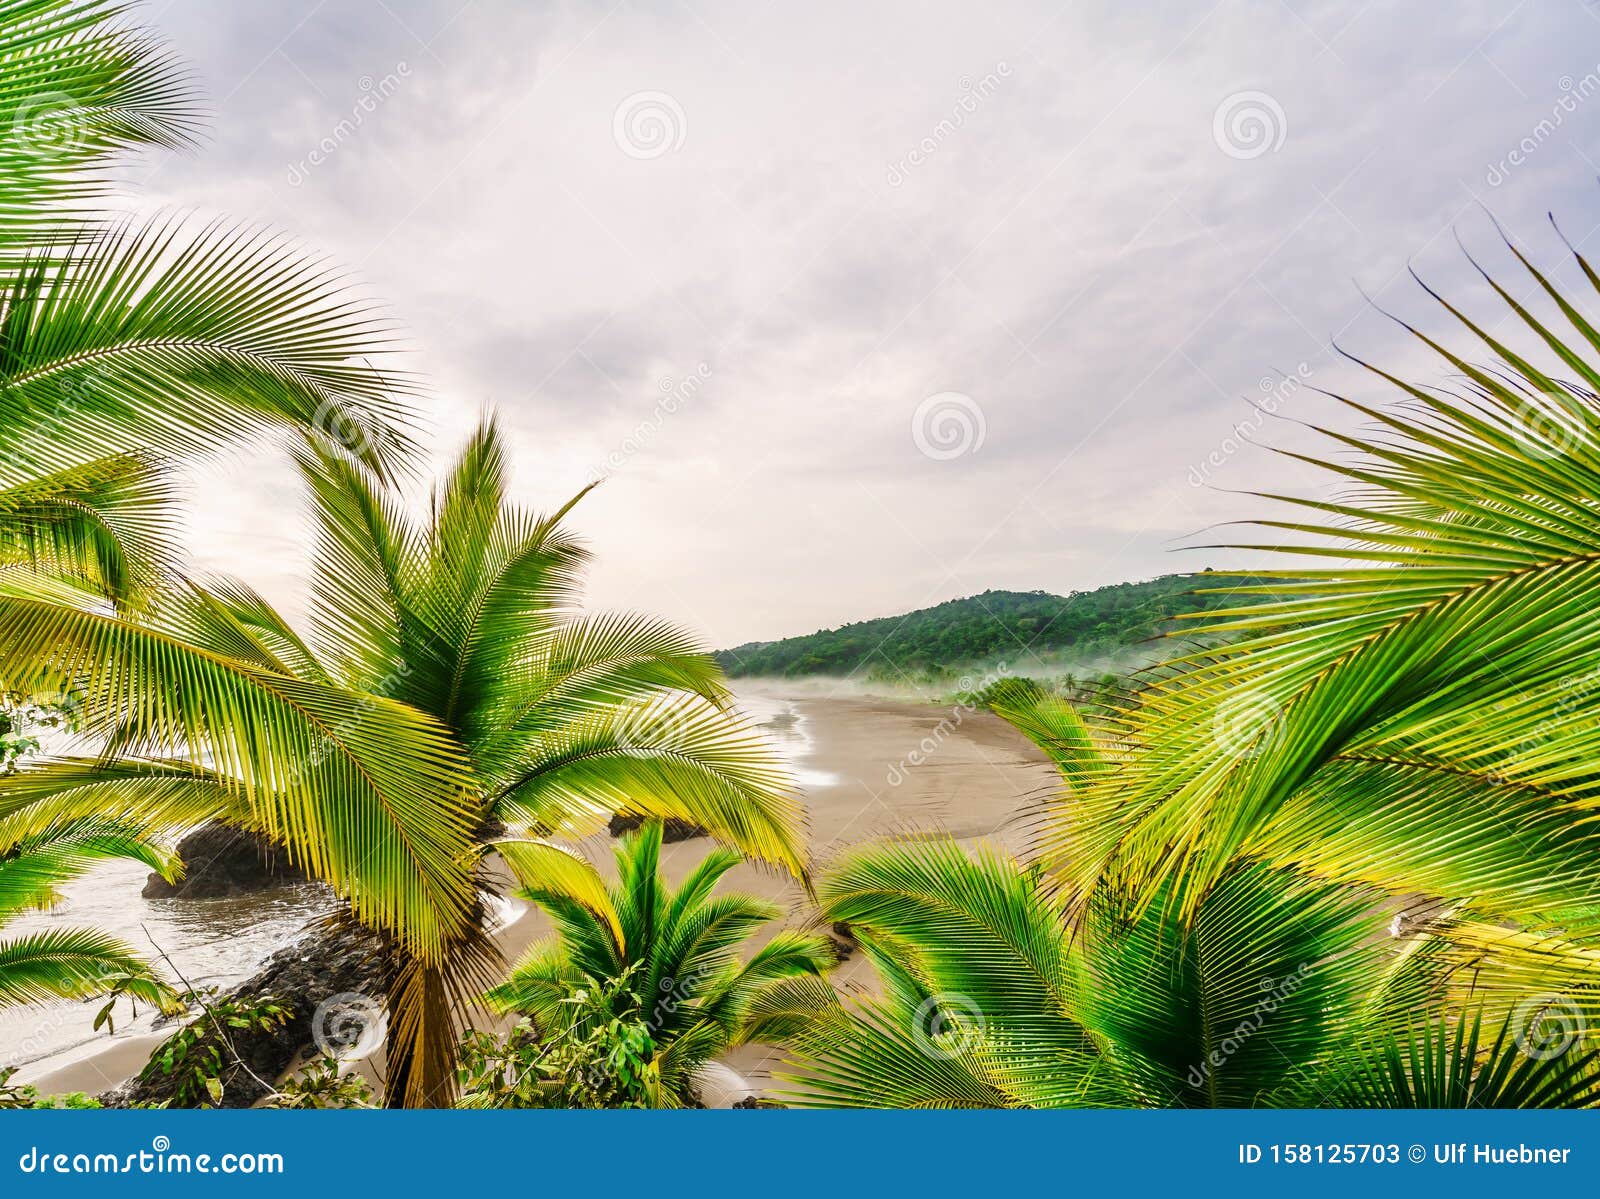 beautiful beach almejal at the pacific ocean coast in choco region by el valle next to bahia solano in colombia